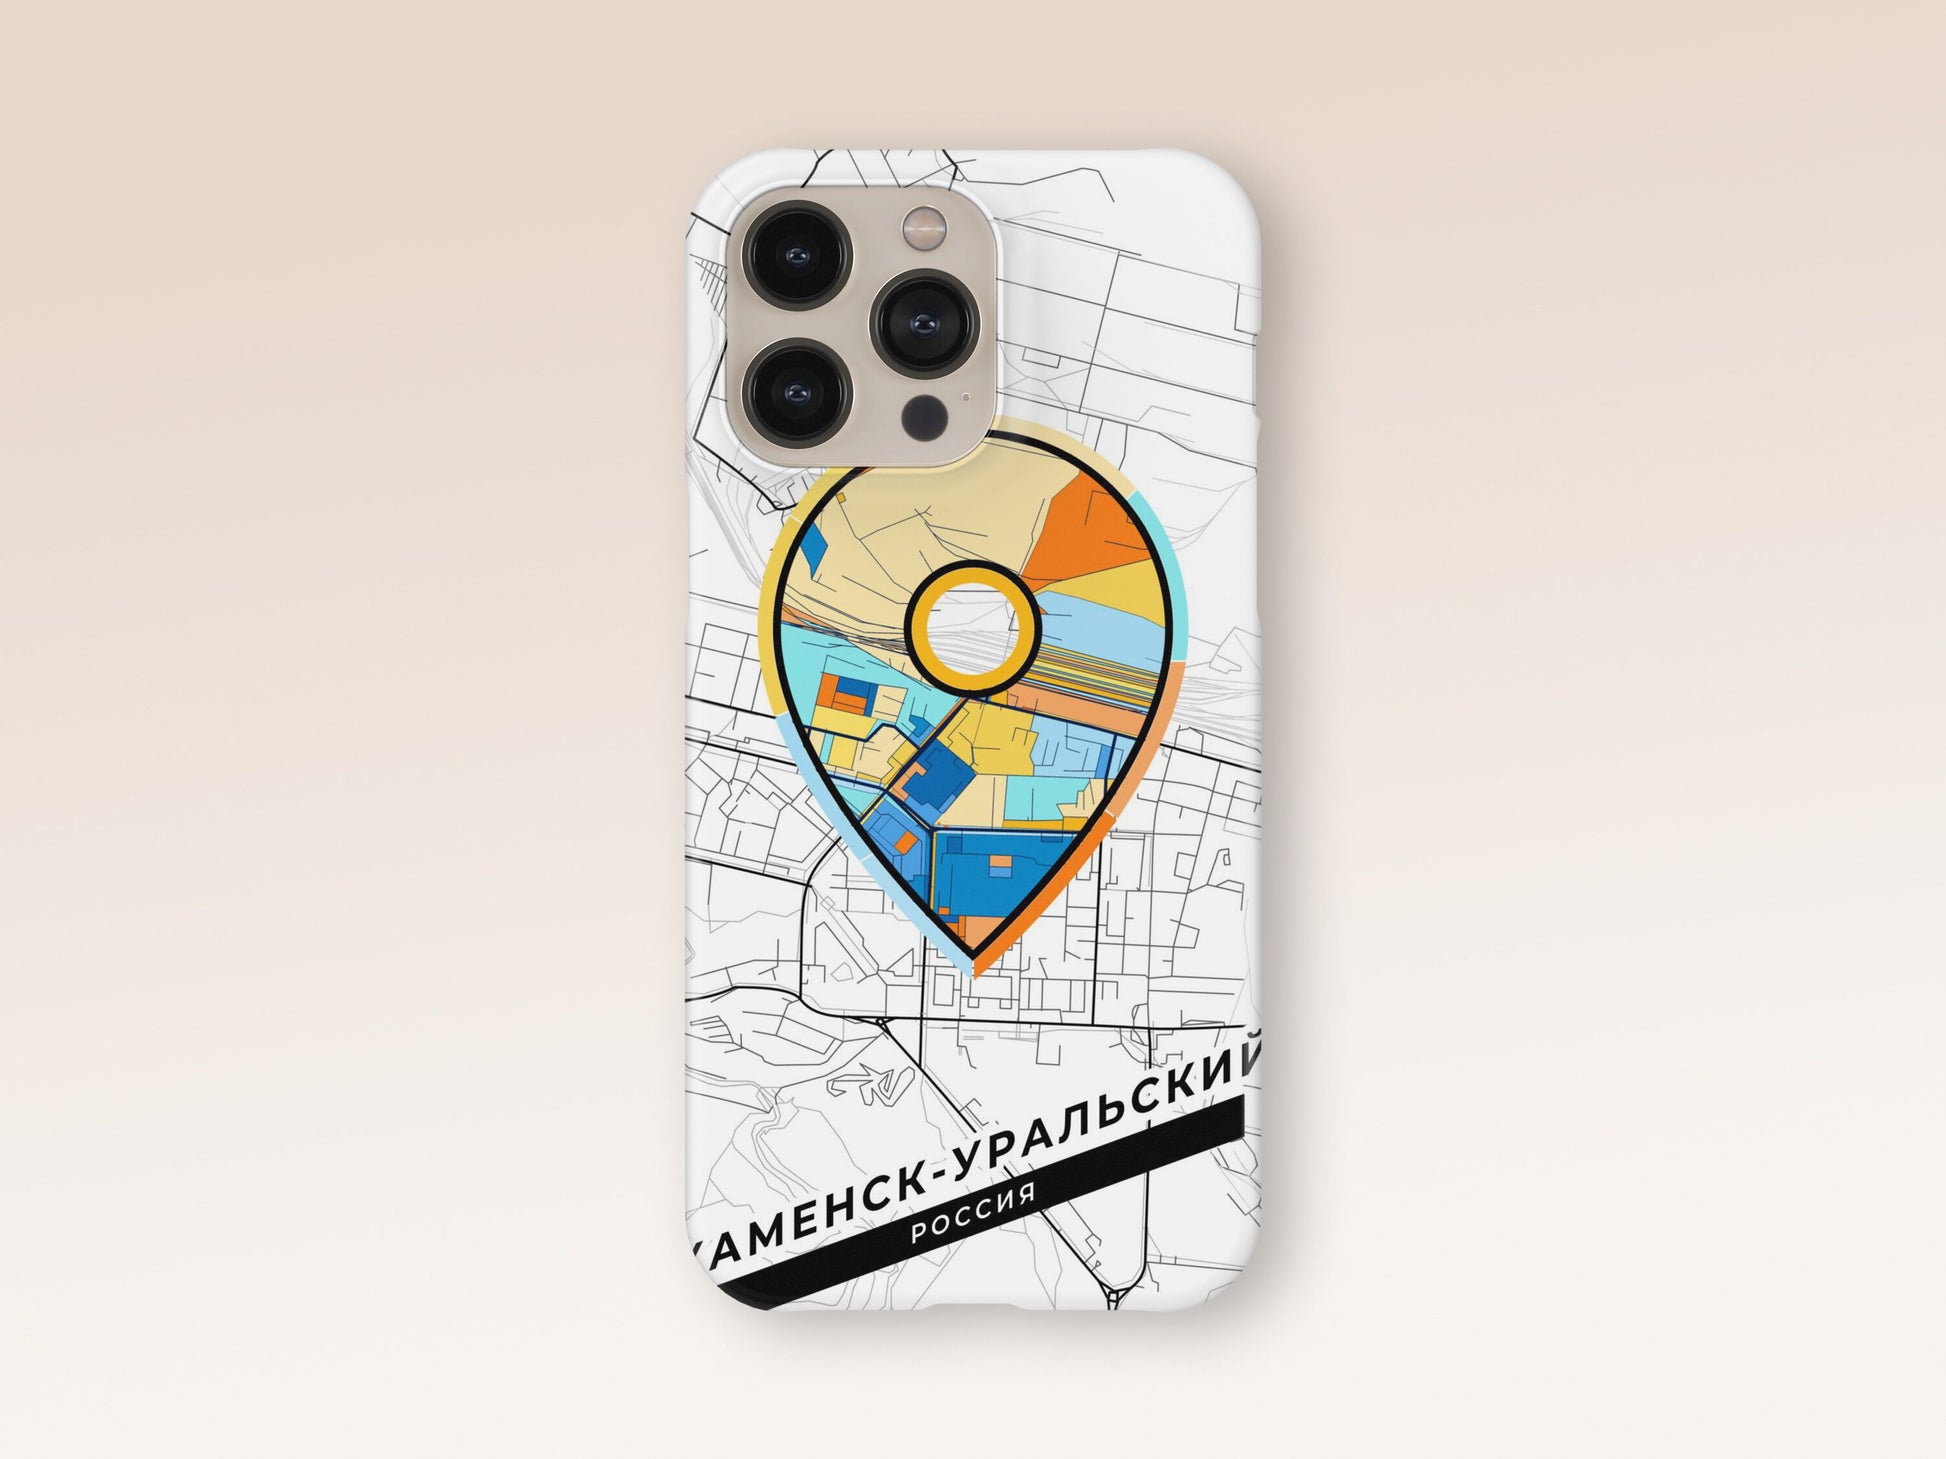 Kamensk-Uralsky Russia slim phone case with colorful icon. Birthday, wedding or housewarming gift. Couple match cases. 1